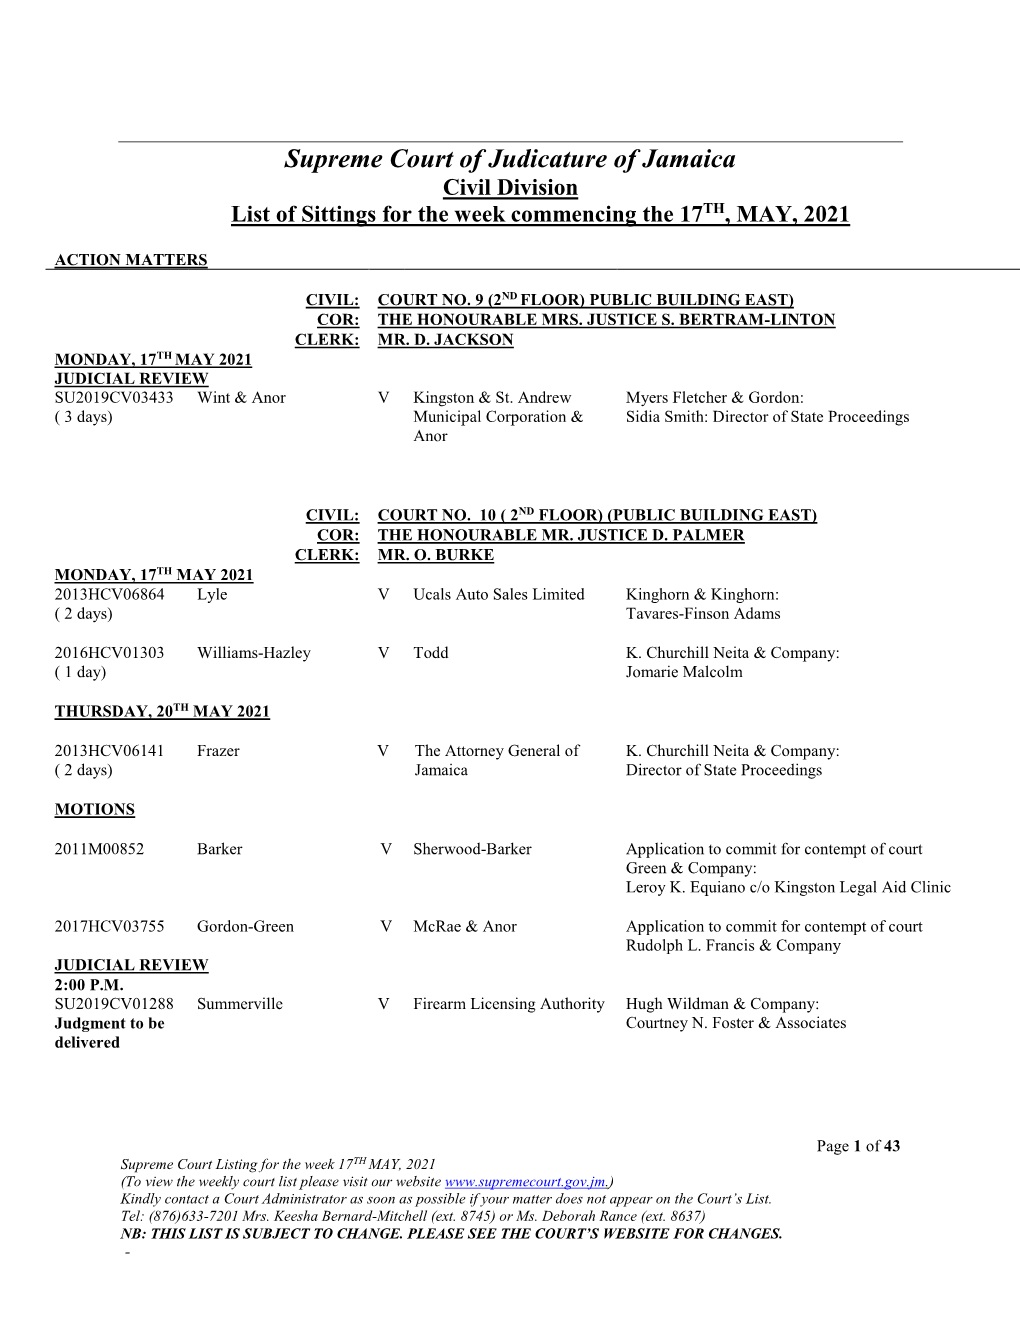 Supreme Court of Judicature of Jamaica Civil Division List of Sittings for the Week Commencing the 17TH, MAY, 2021